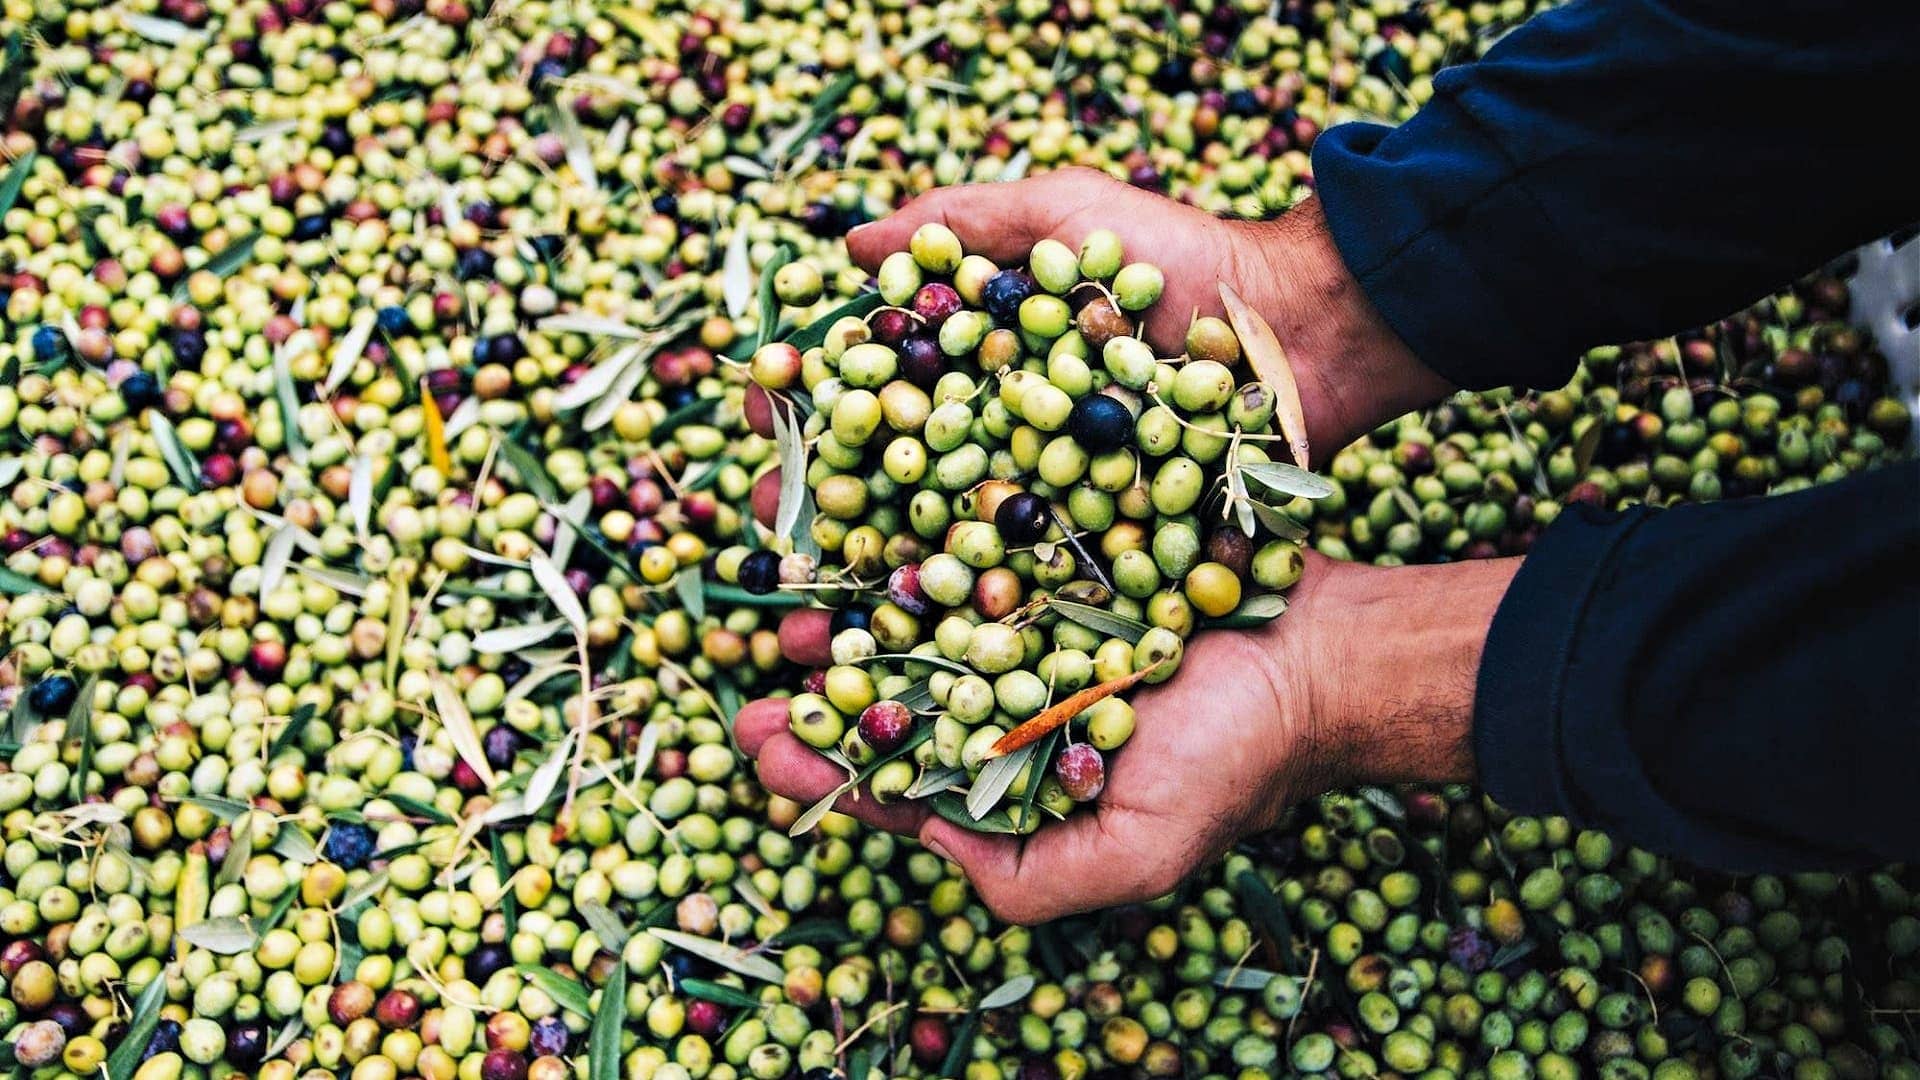 competitions-north-america-production-the-best-olive-oils-awards-for-california-producers-validate-high-evoo-standards-olive-oil-times